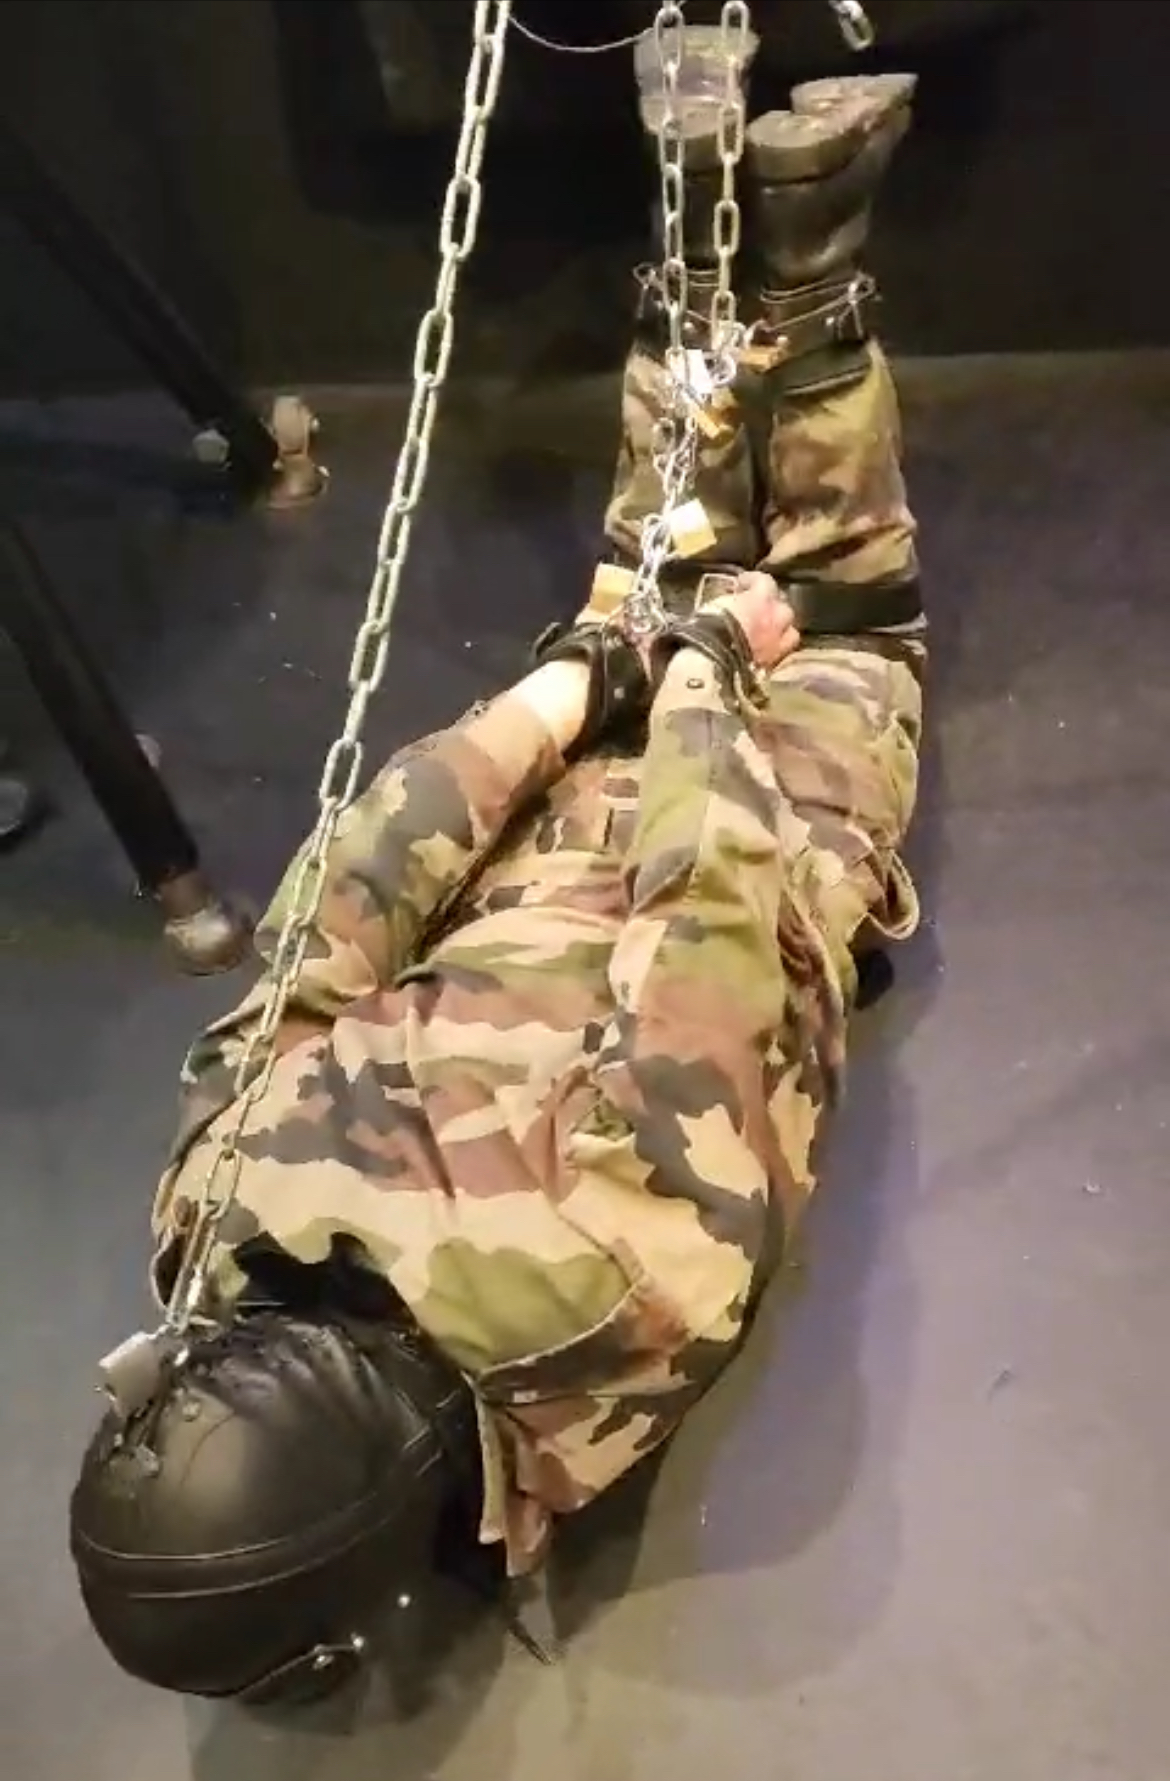 Hogtied militaire